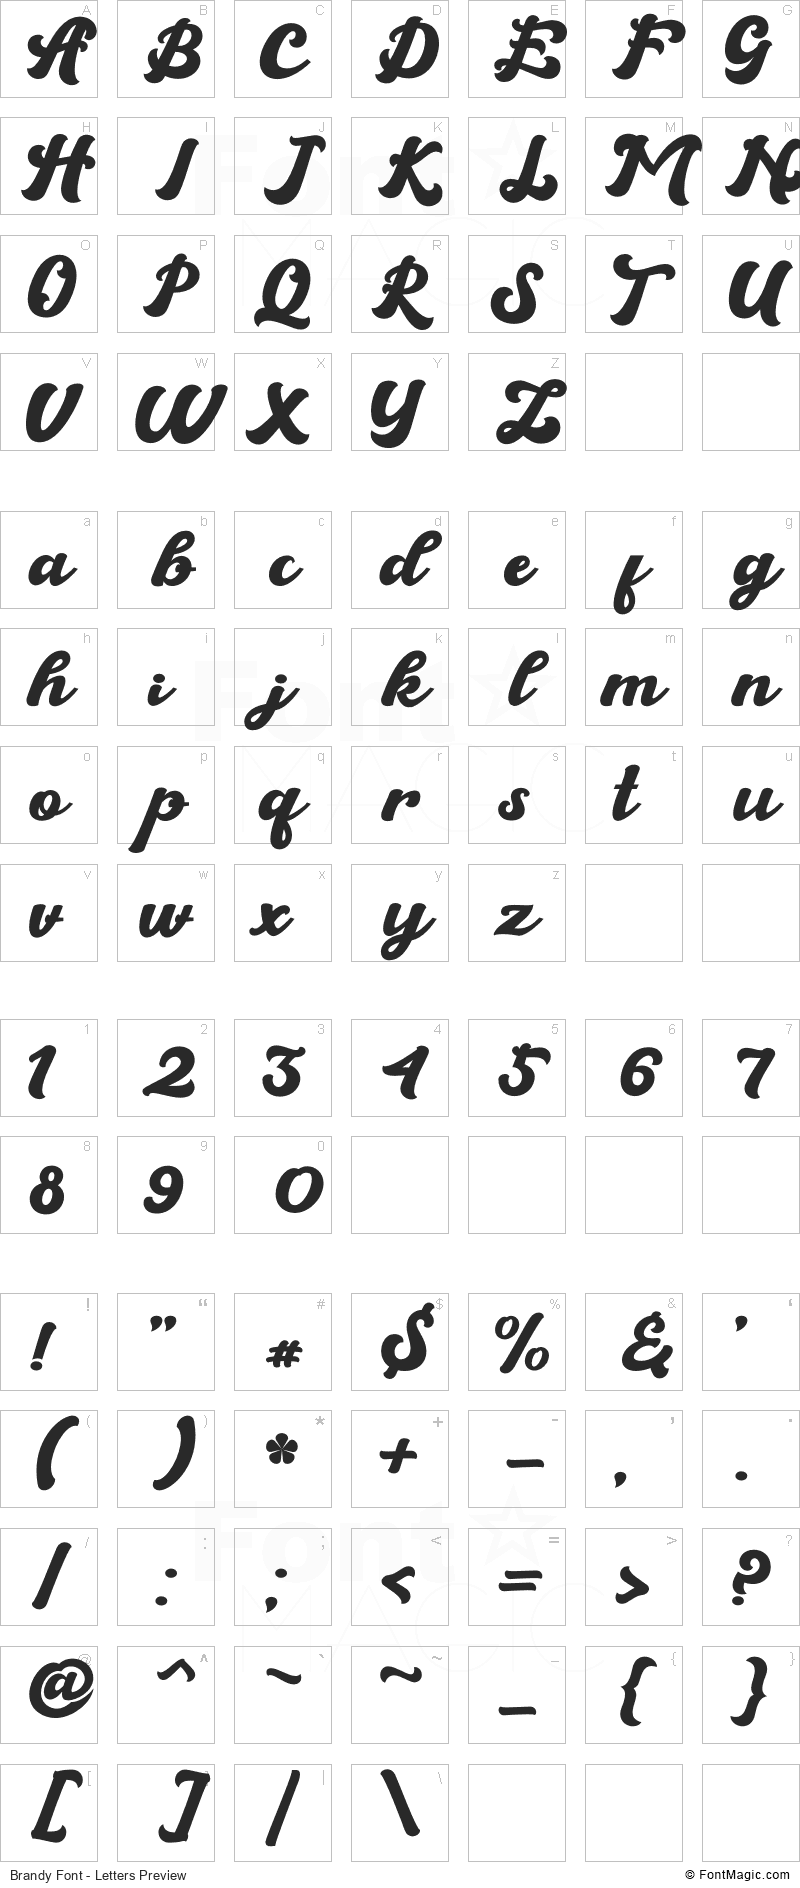 Brandy Font - All Latters Preview Chart